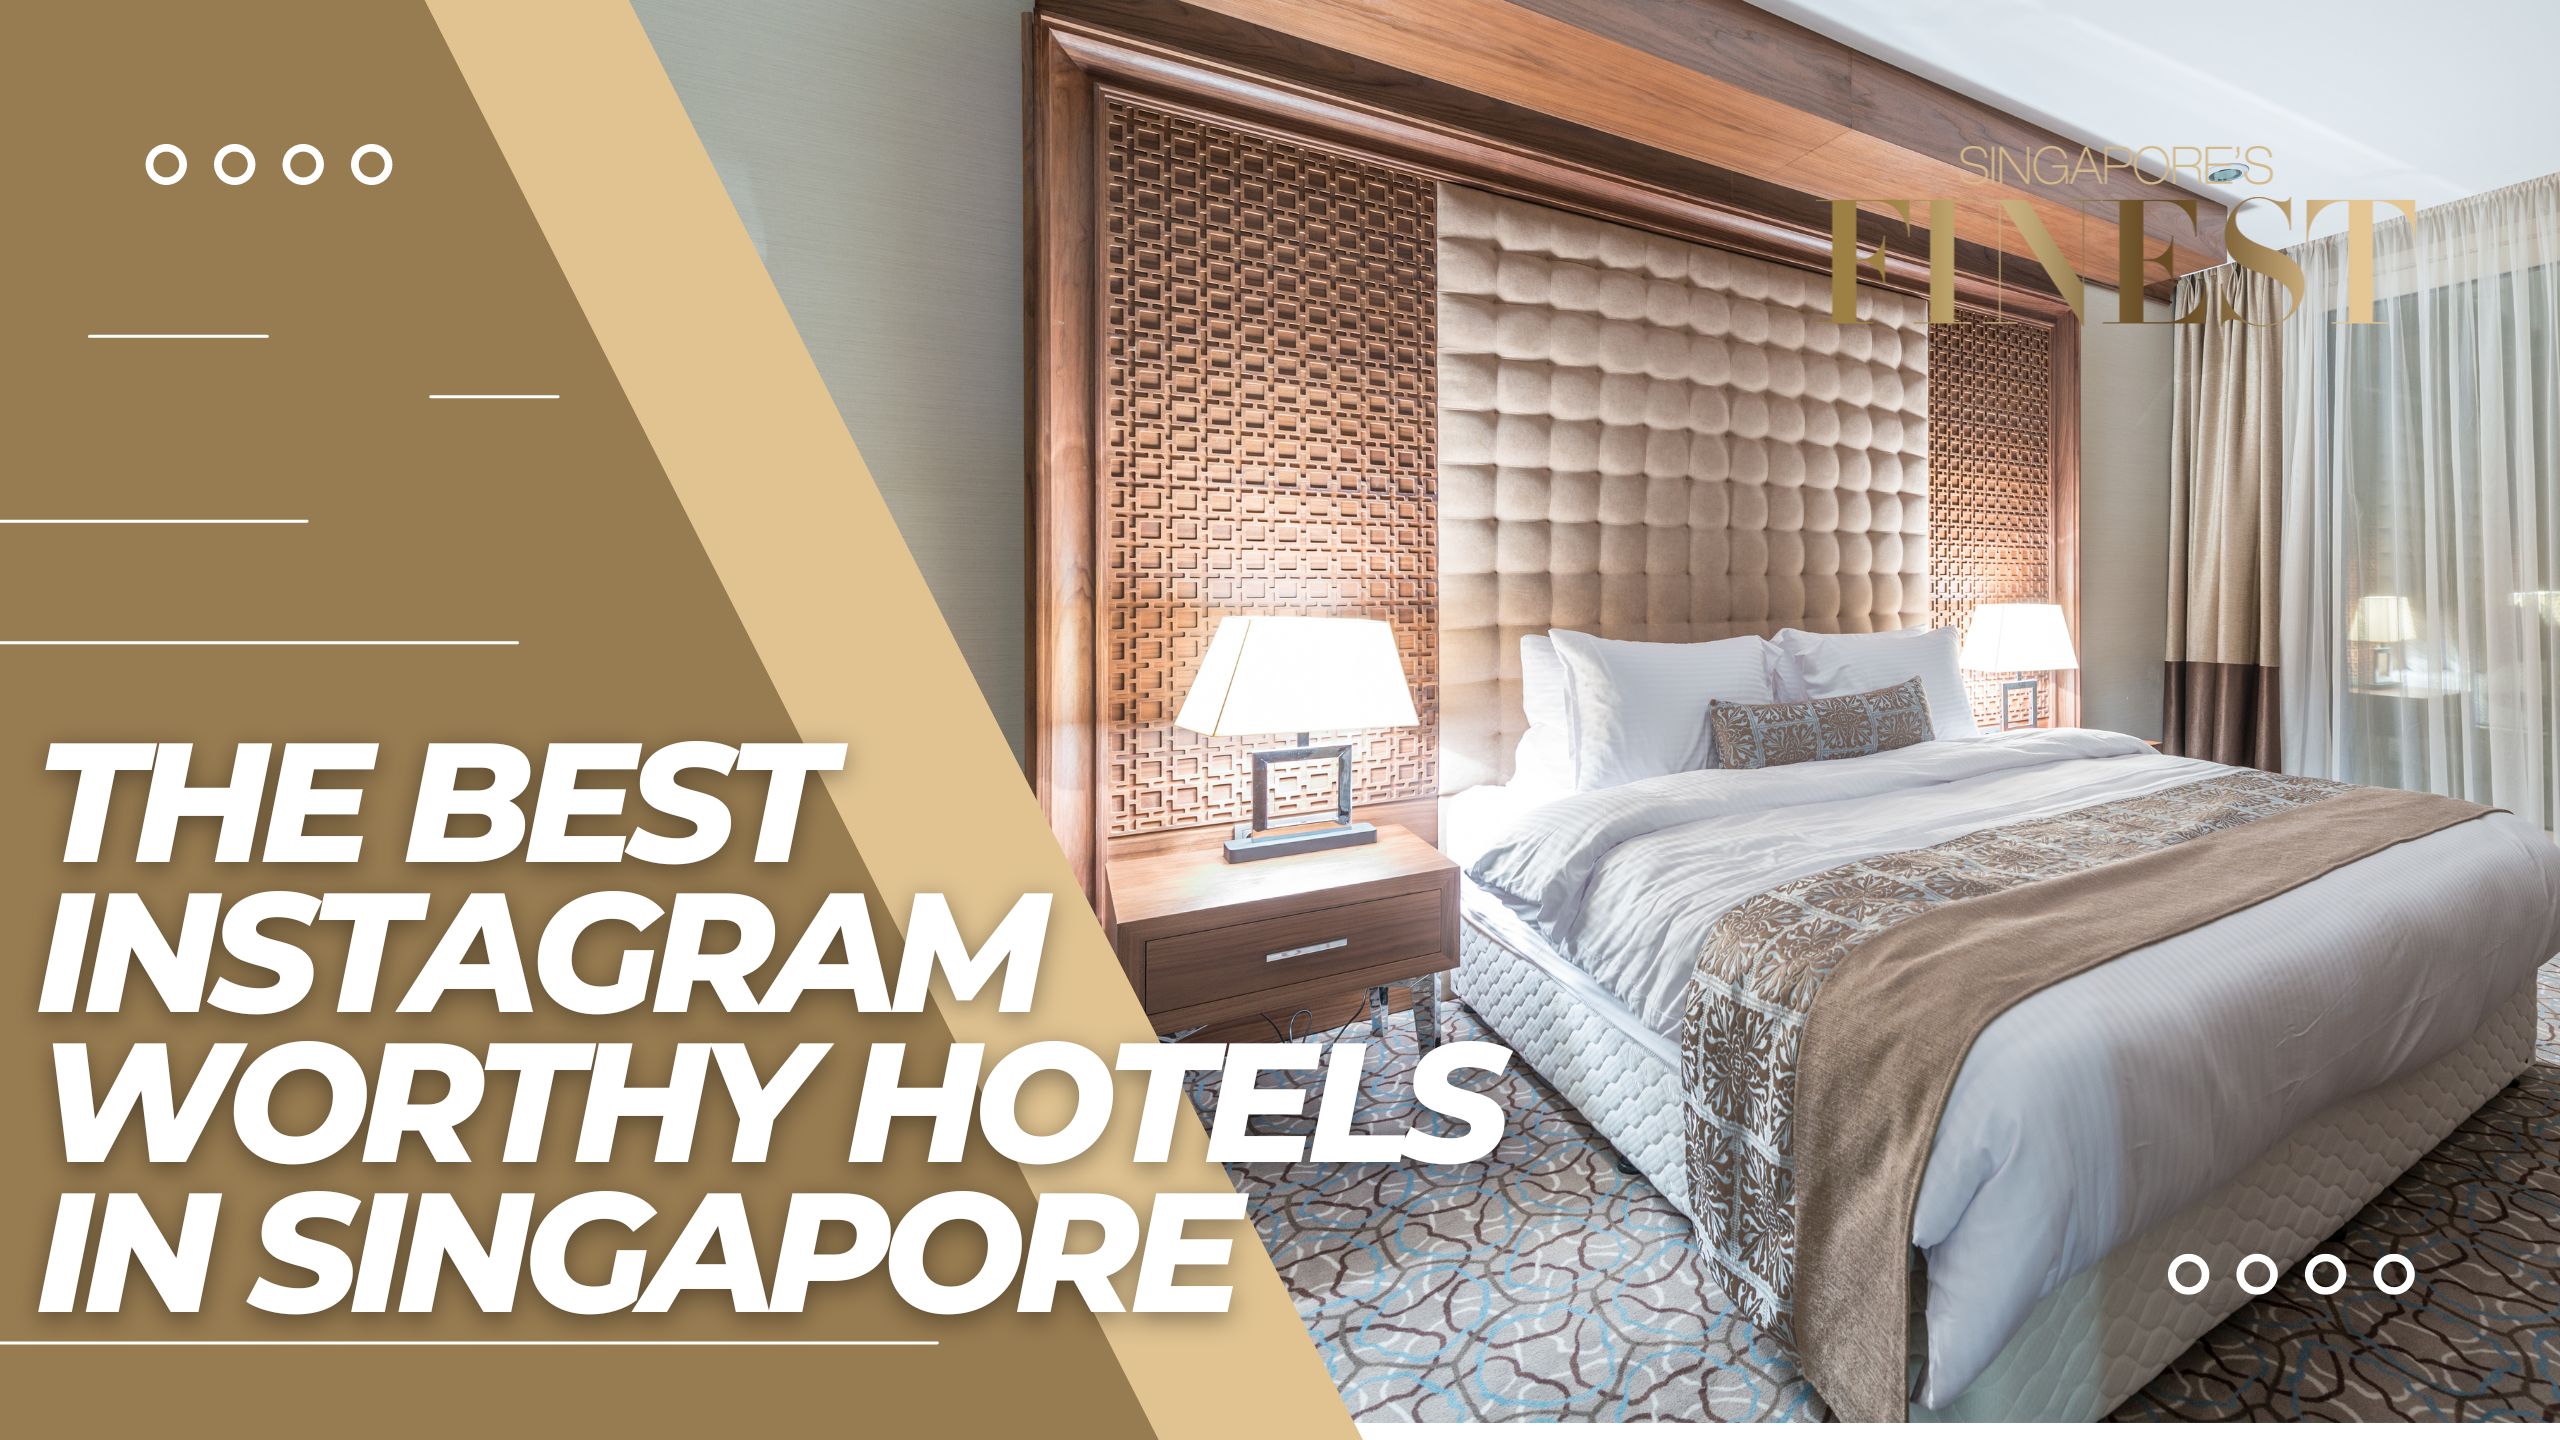 The Finest Instagram Worthy Hotels in Singapore